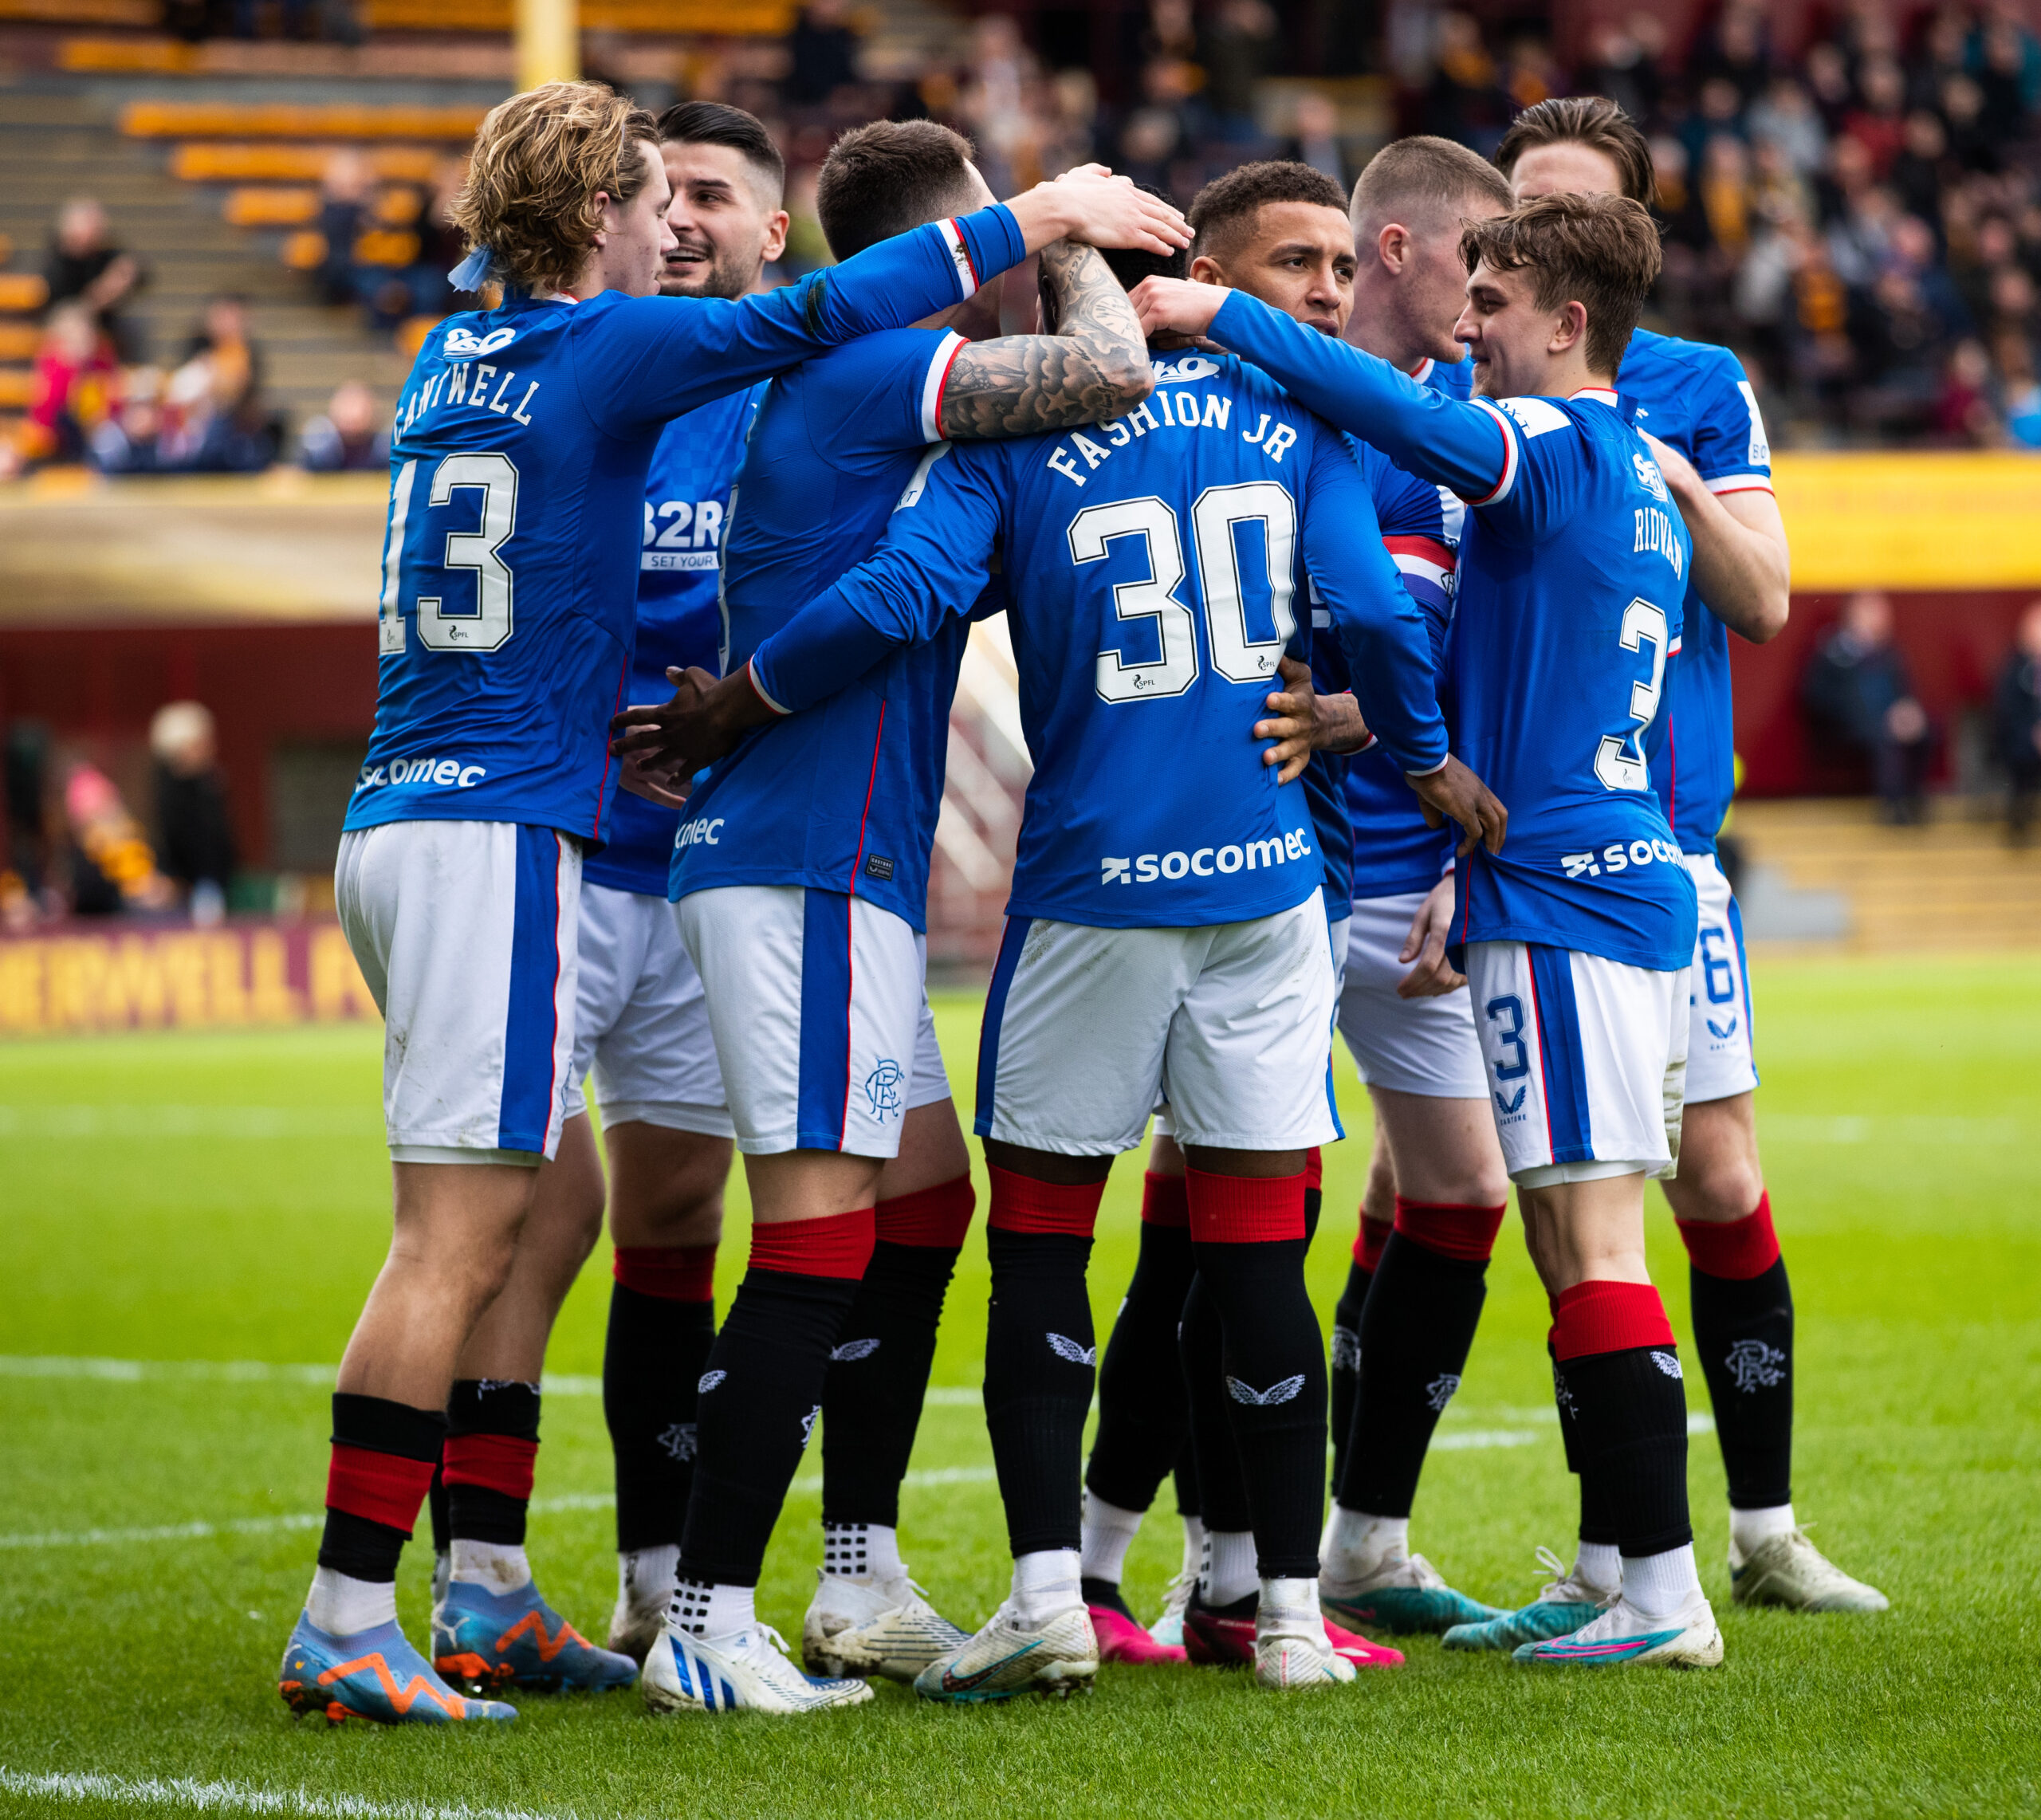 Livingston James Retained By Rangers Football Club To, 55% OFF